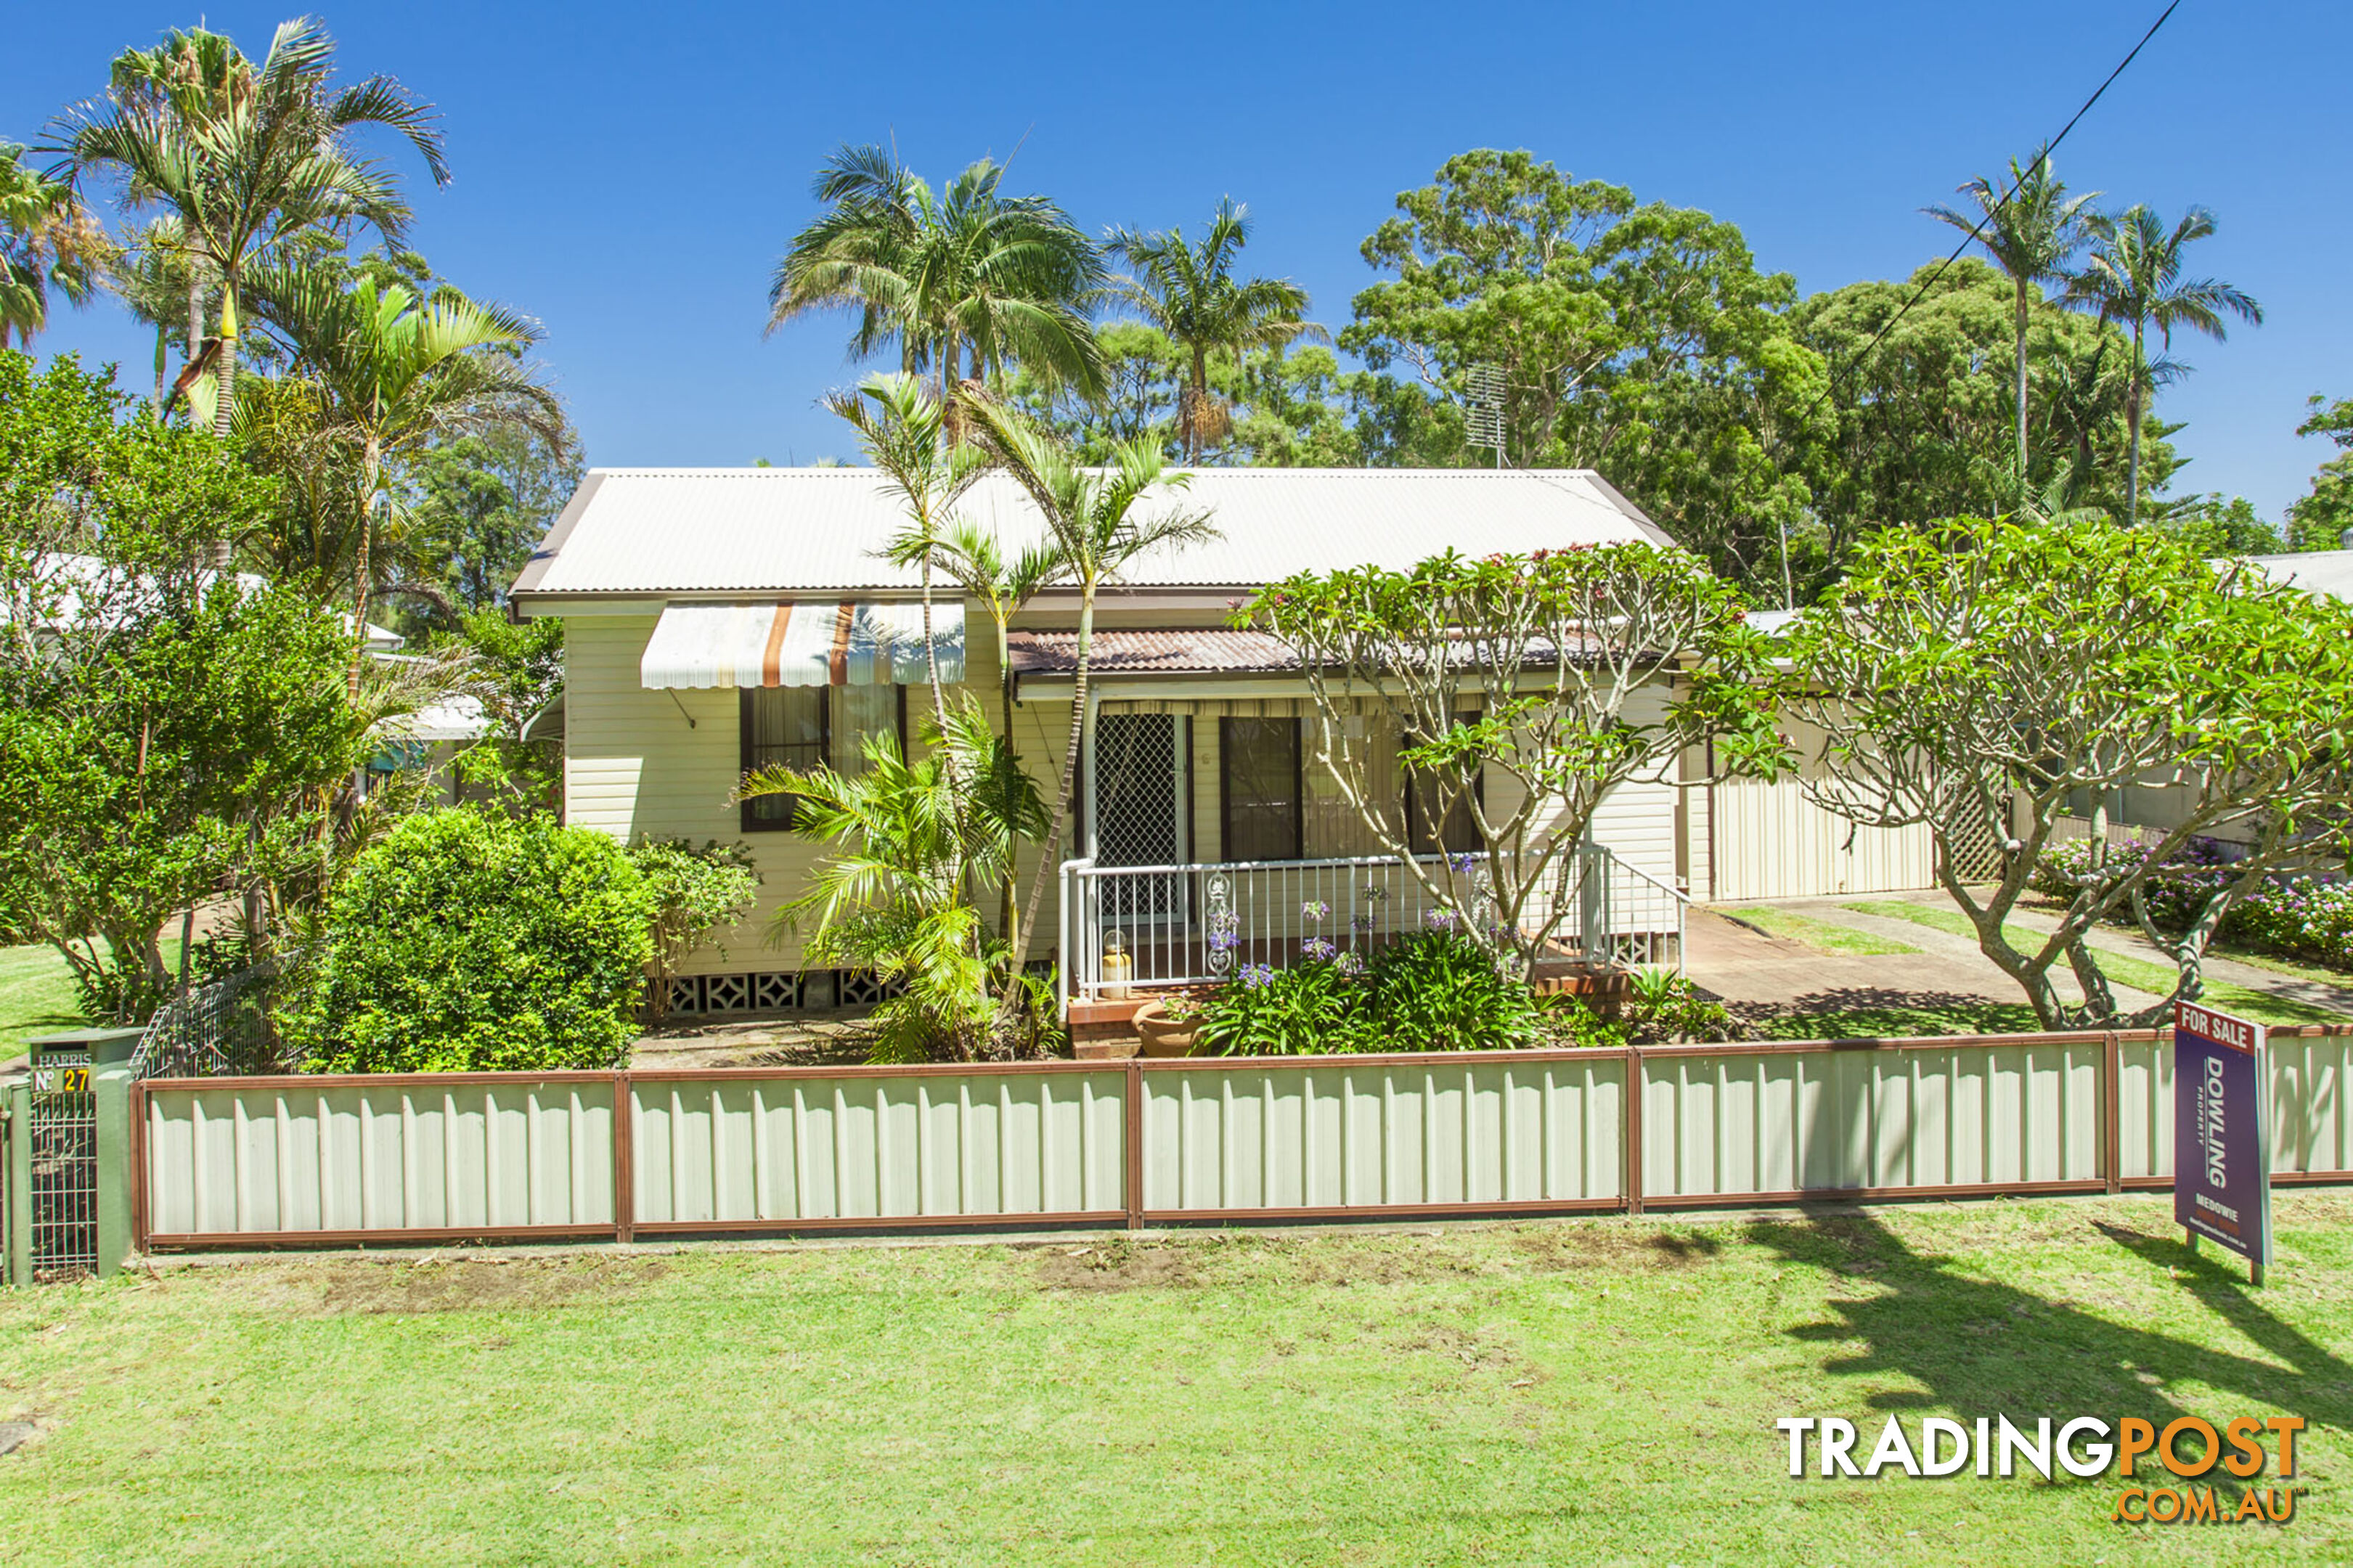 29A Waterfront Road SWAN BAY NSW 2324